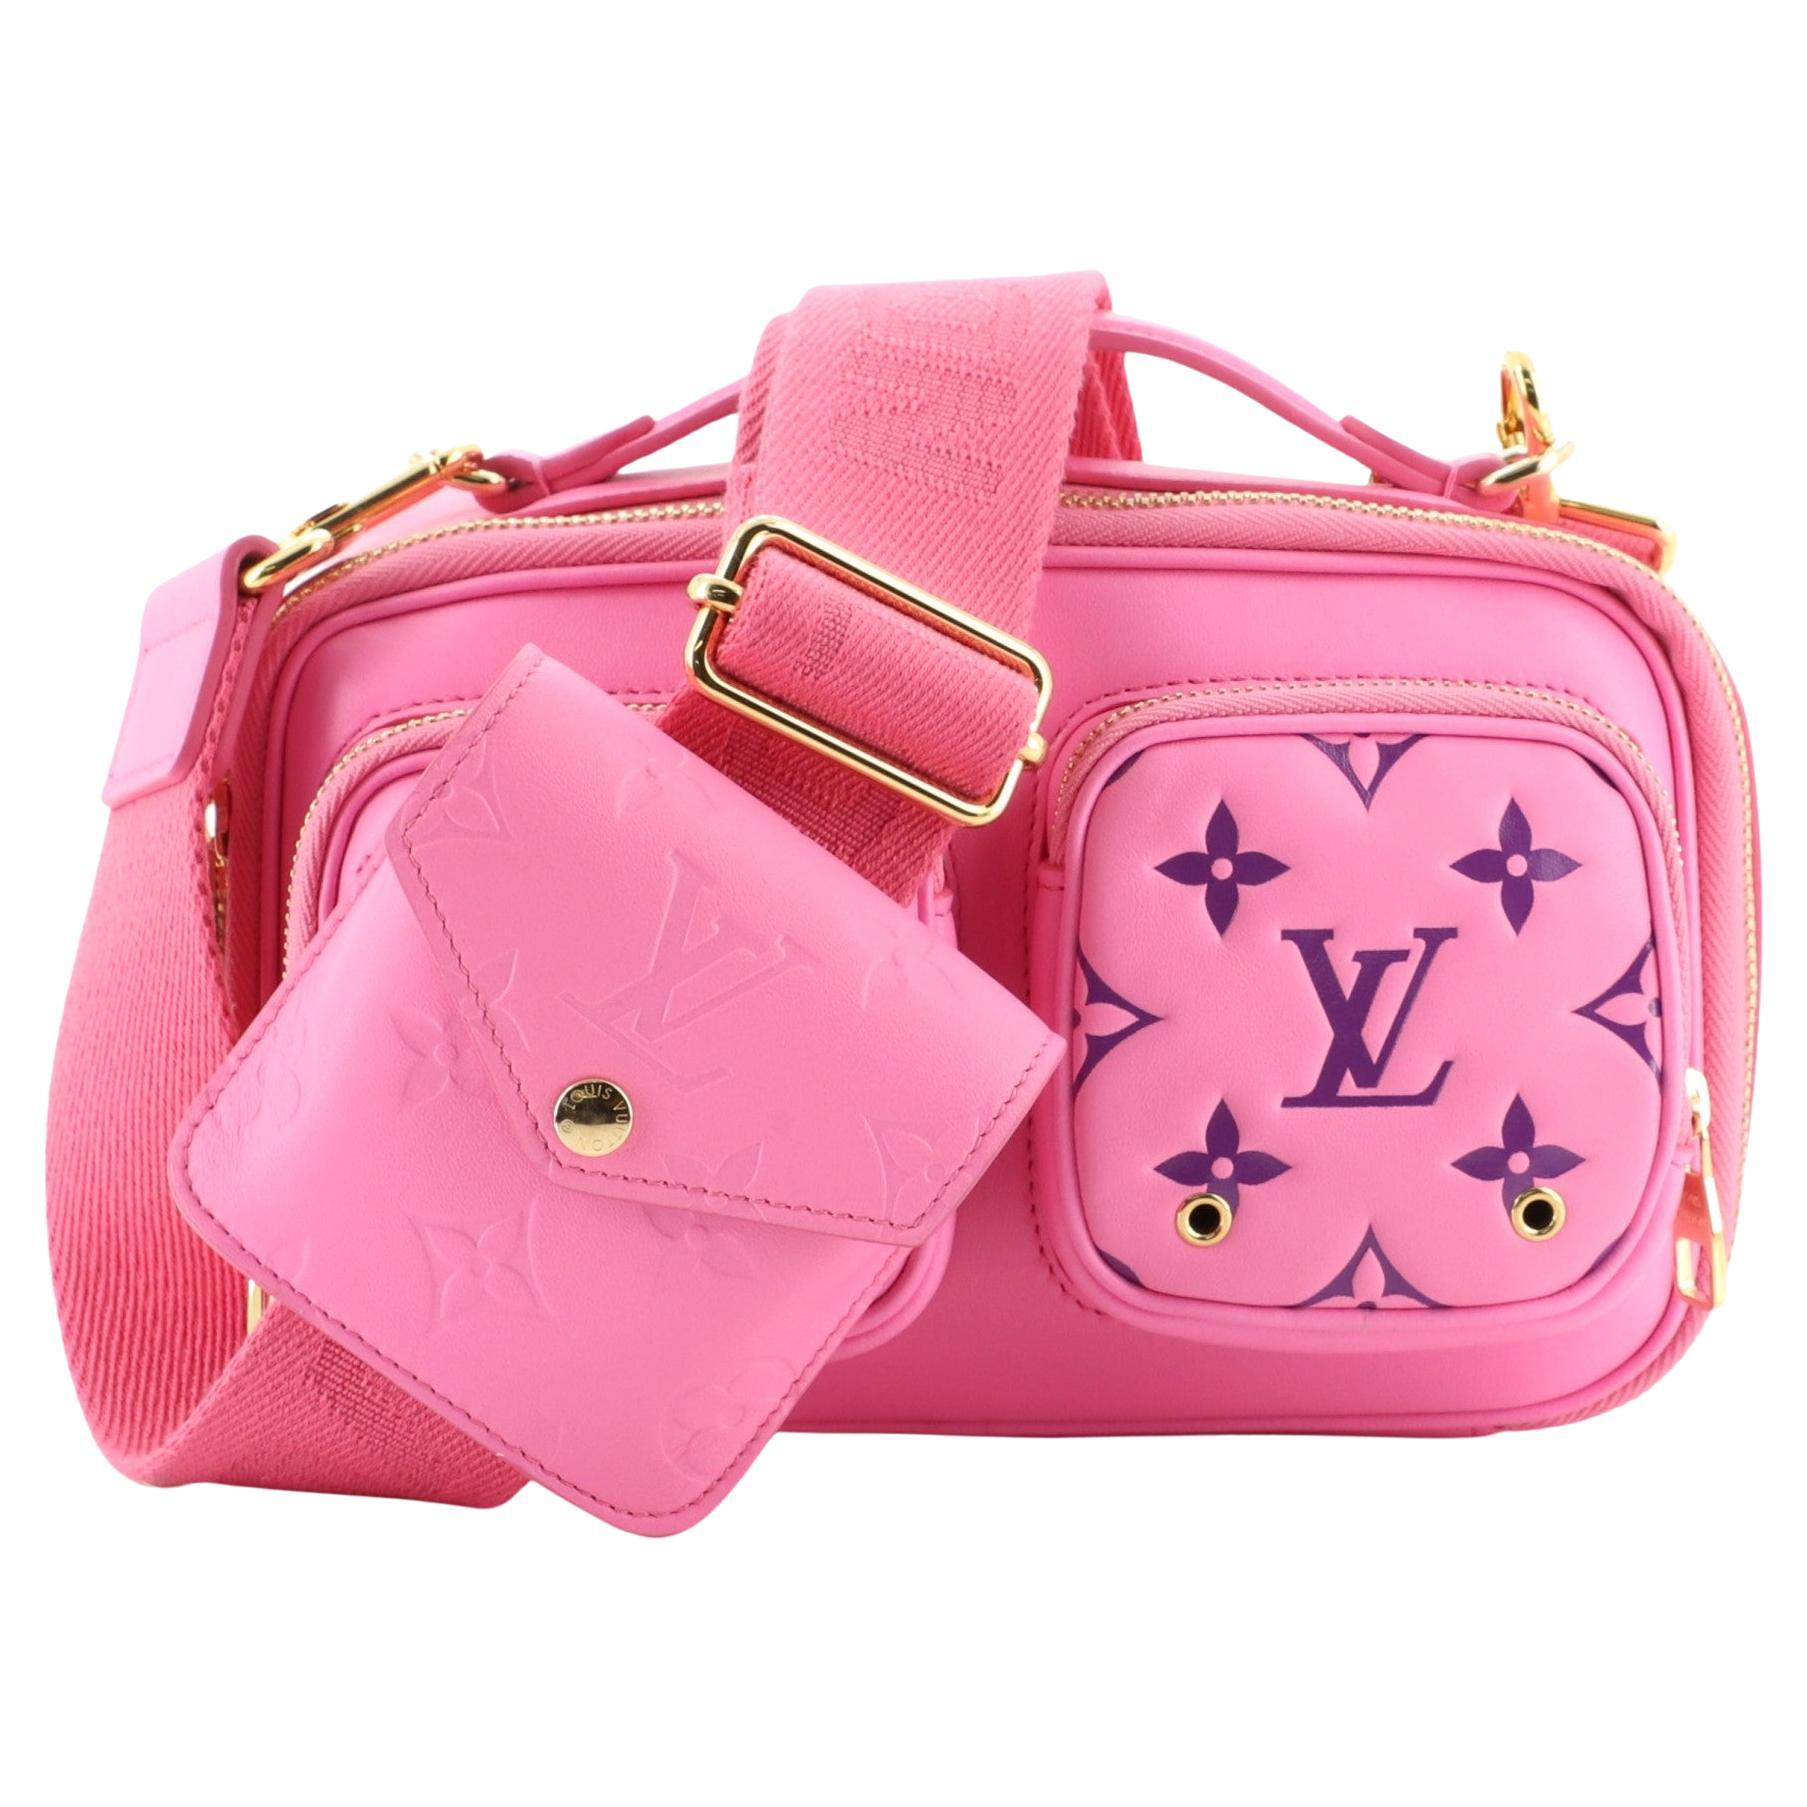 Exclusive SALE on REDELUXE: Buy Authentic Louis Vuitton Utility Crossbody  Bag